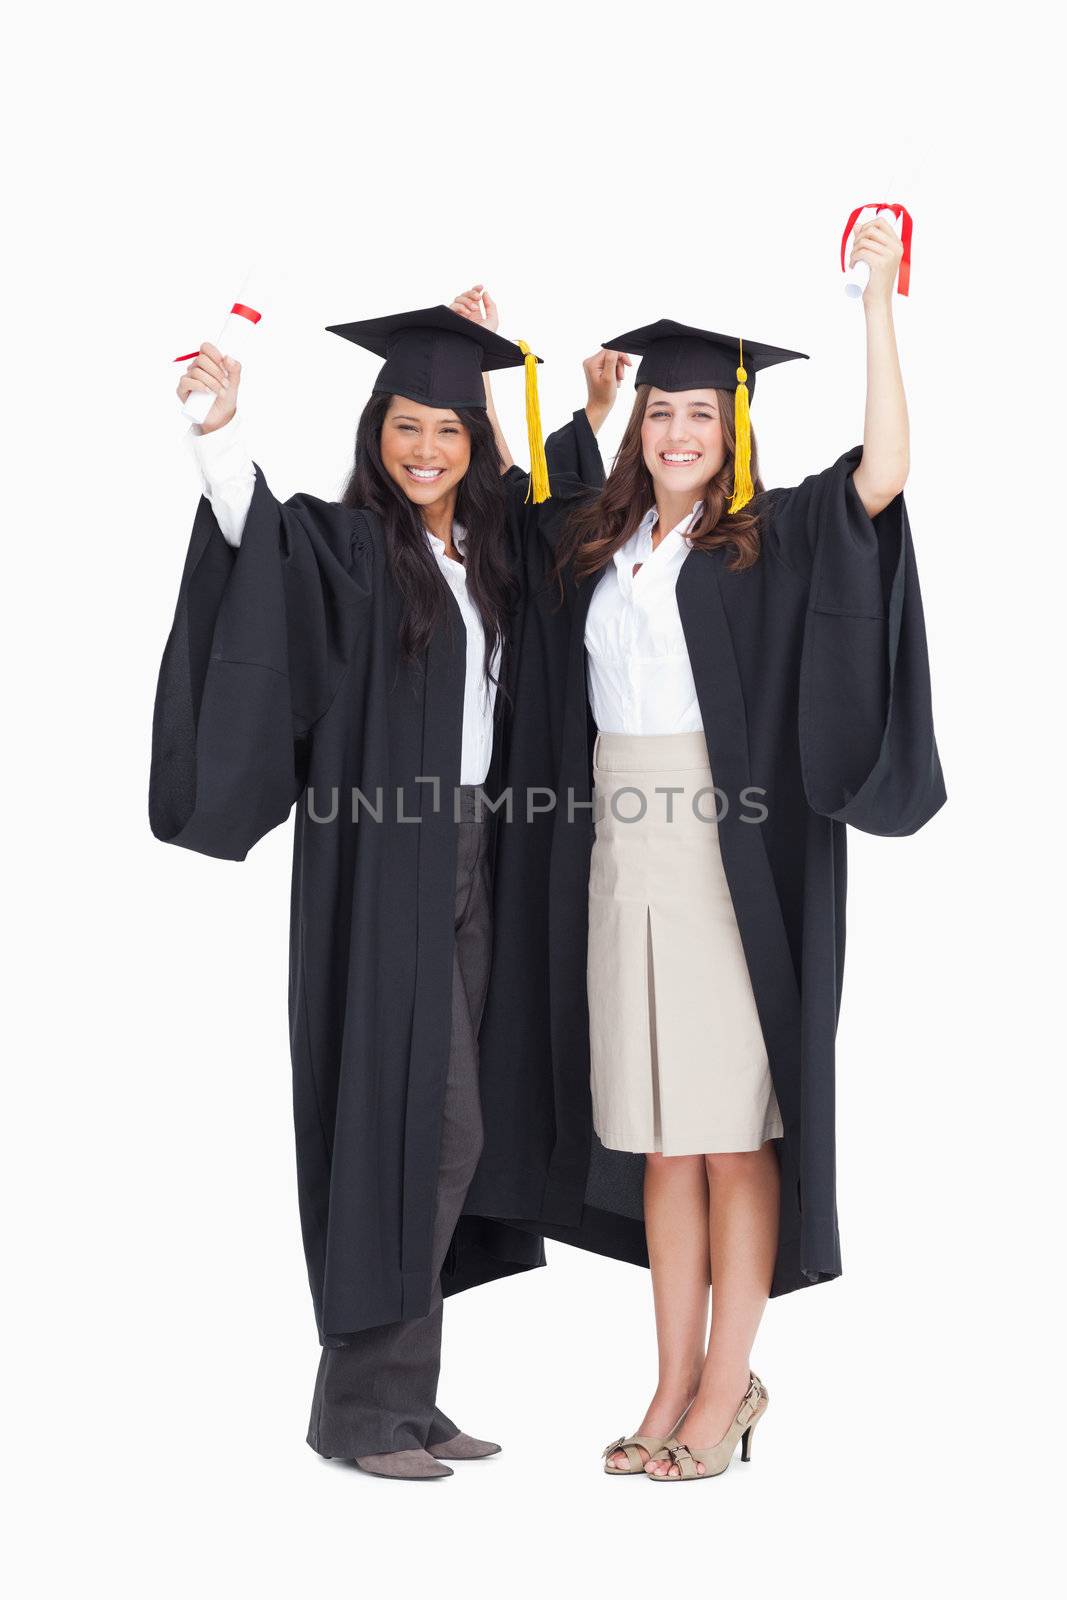 A pair of women celebrate as they have graduated 